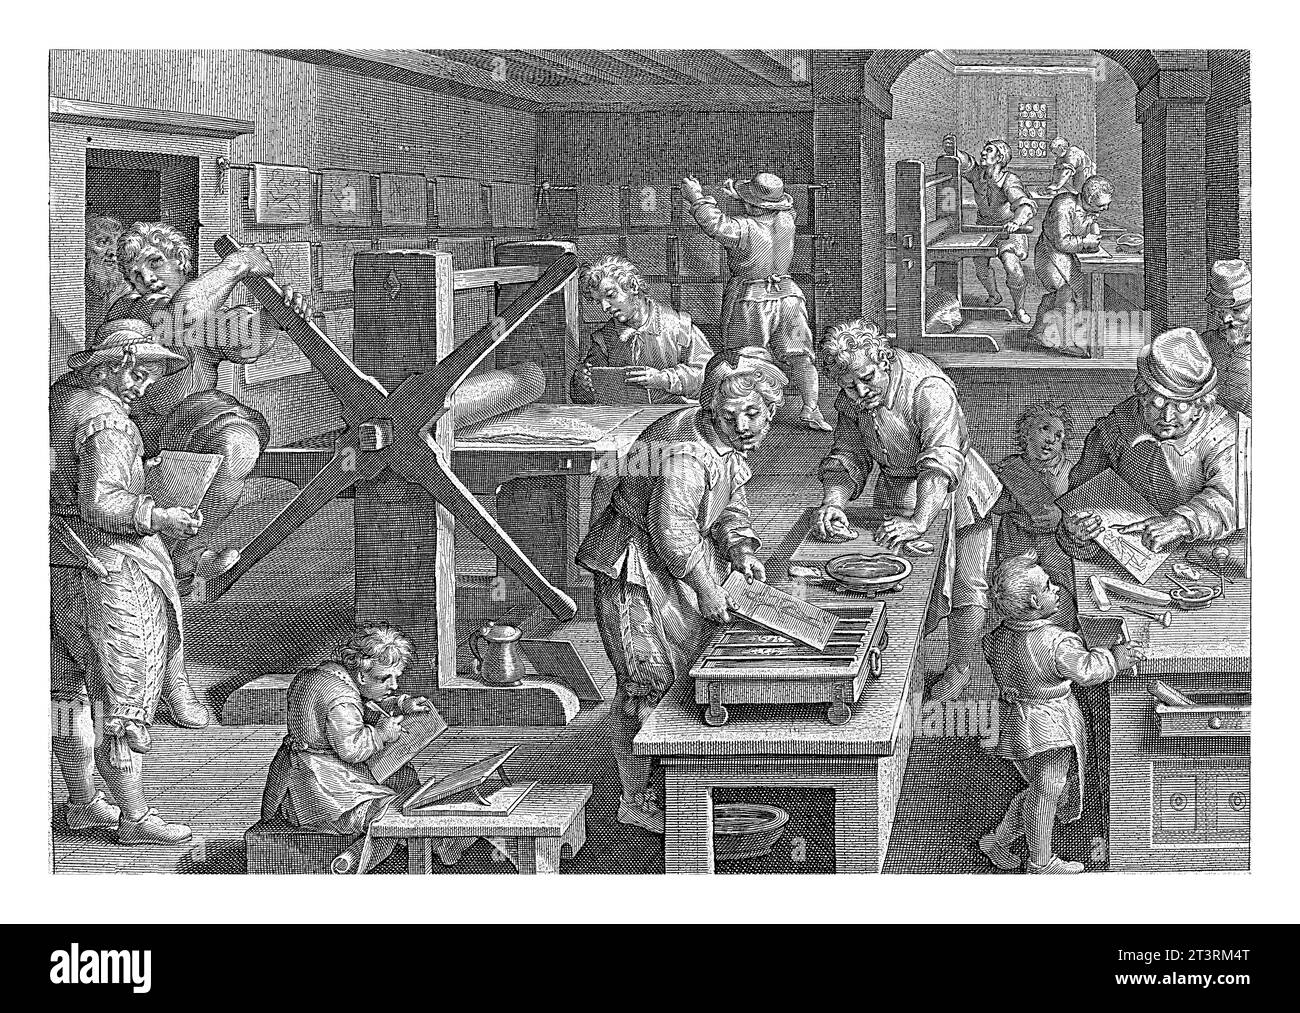 Production of copper engravings, Philips Galle (attributed to workshop of), after Jan van der Straet, c. 1593 - c. 1598 The interior of a printing hou Stock Photo